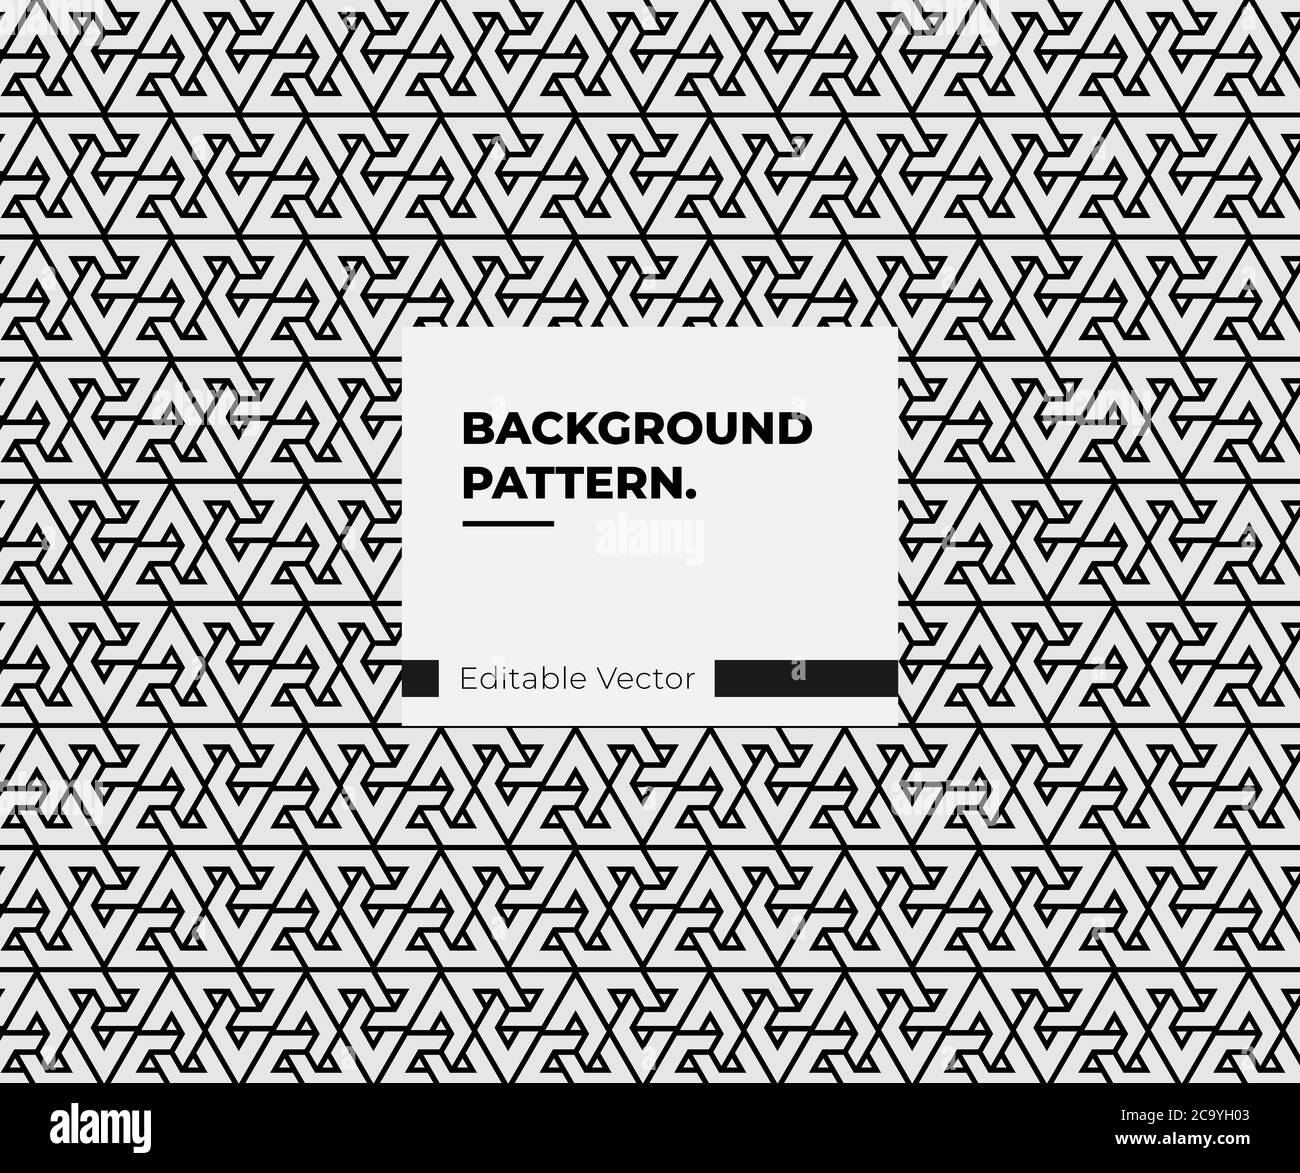 black and white geometric background pattern Stock Vector